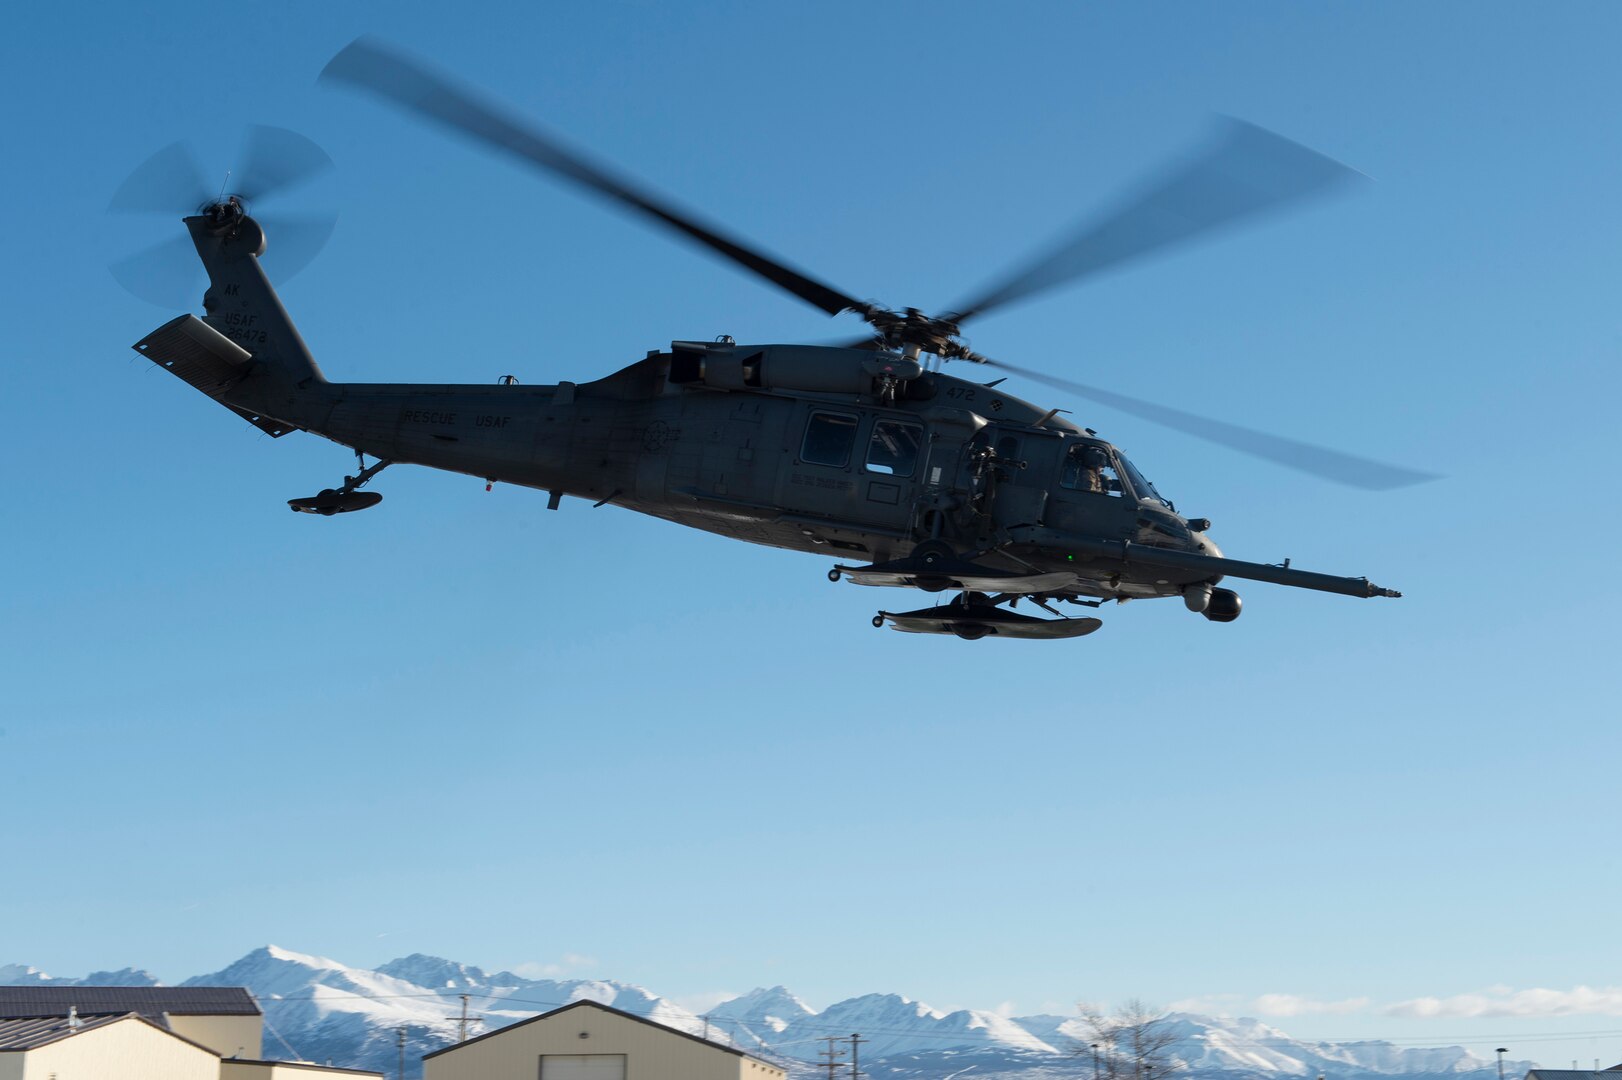 An HH-60G Pave Hawk helicopter operated by Alaska Air National Guardsmen with the 210th Rescue Squadron takes off for aerial live-fire gunnery training at Joint Base Elmendorf-Richardson, Alaska, March 19, 2019. A similar aircraft helped rescue a person mauled by a bear on June 10, 2019.